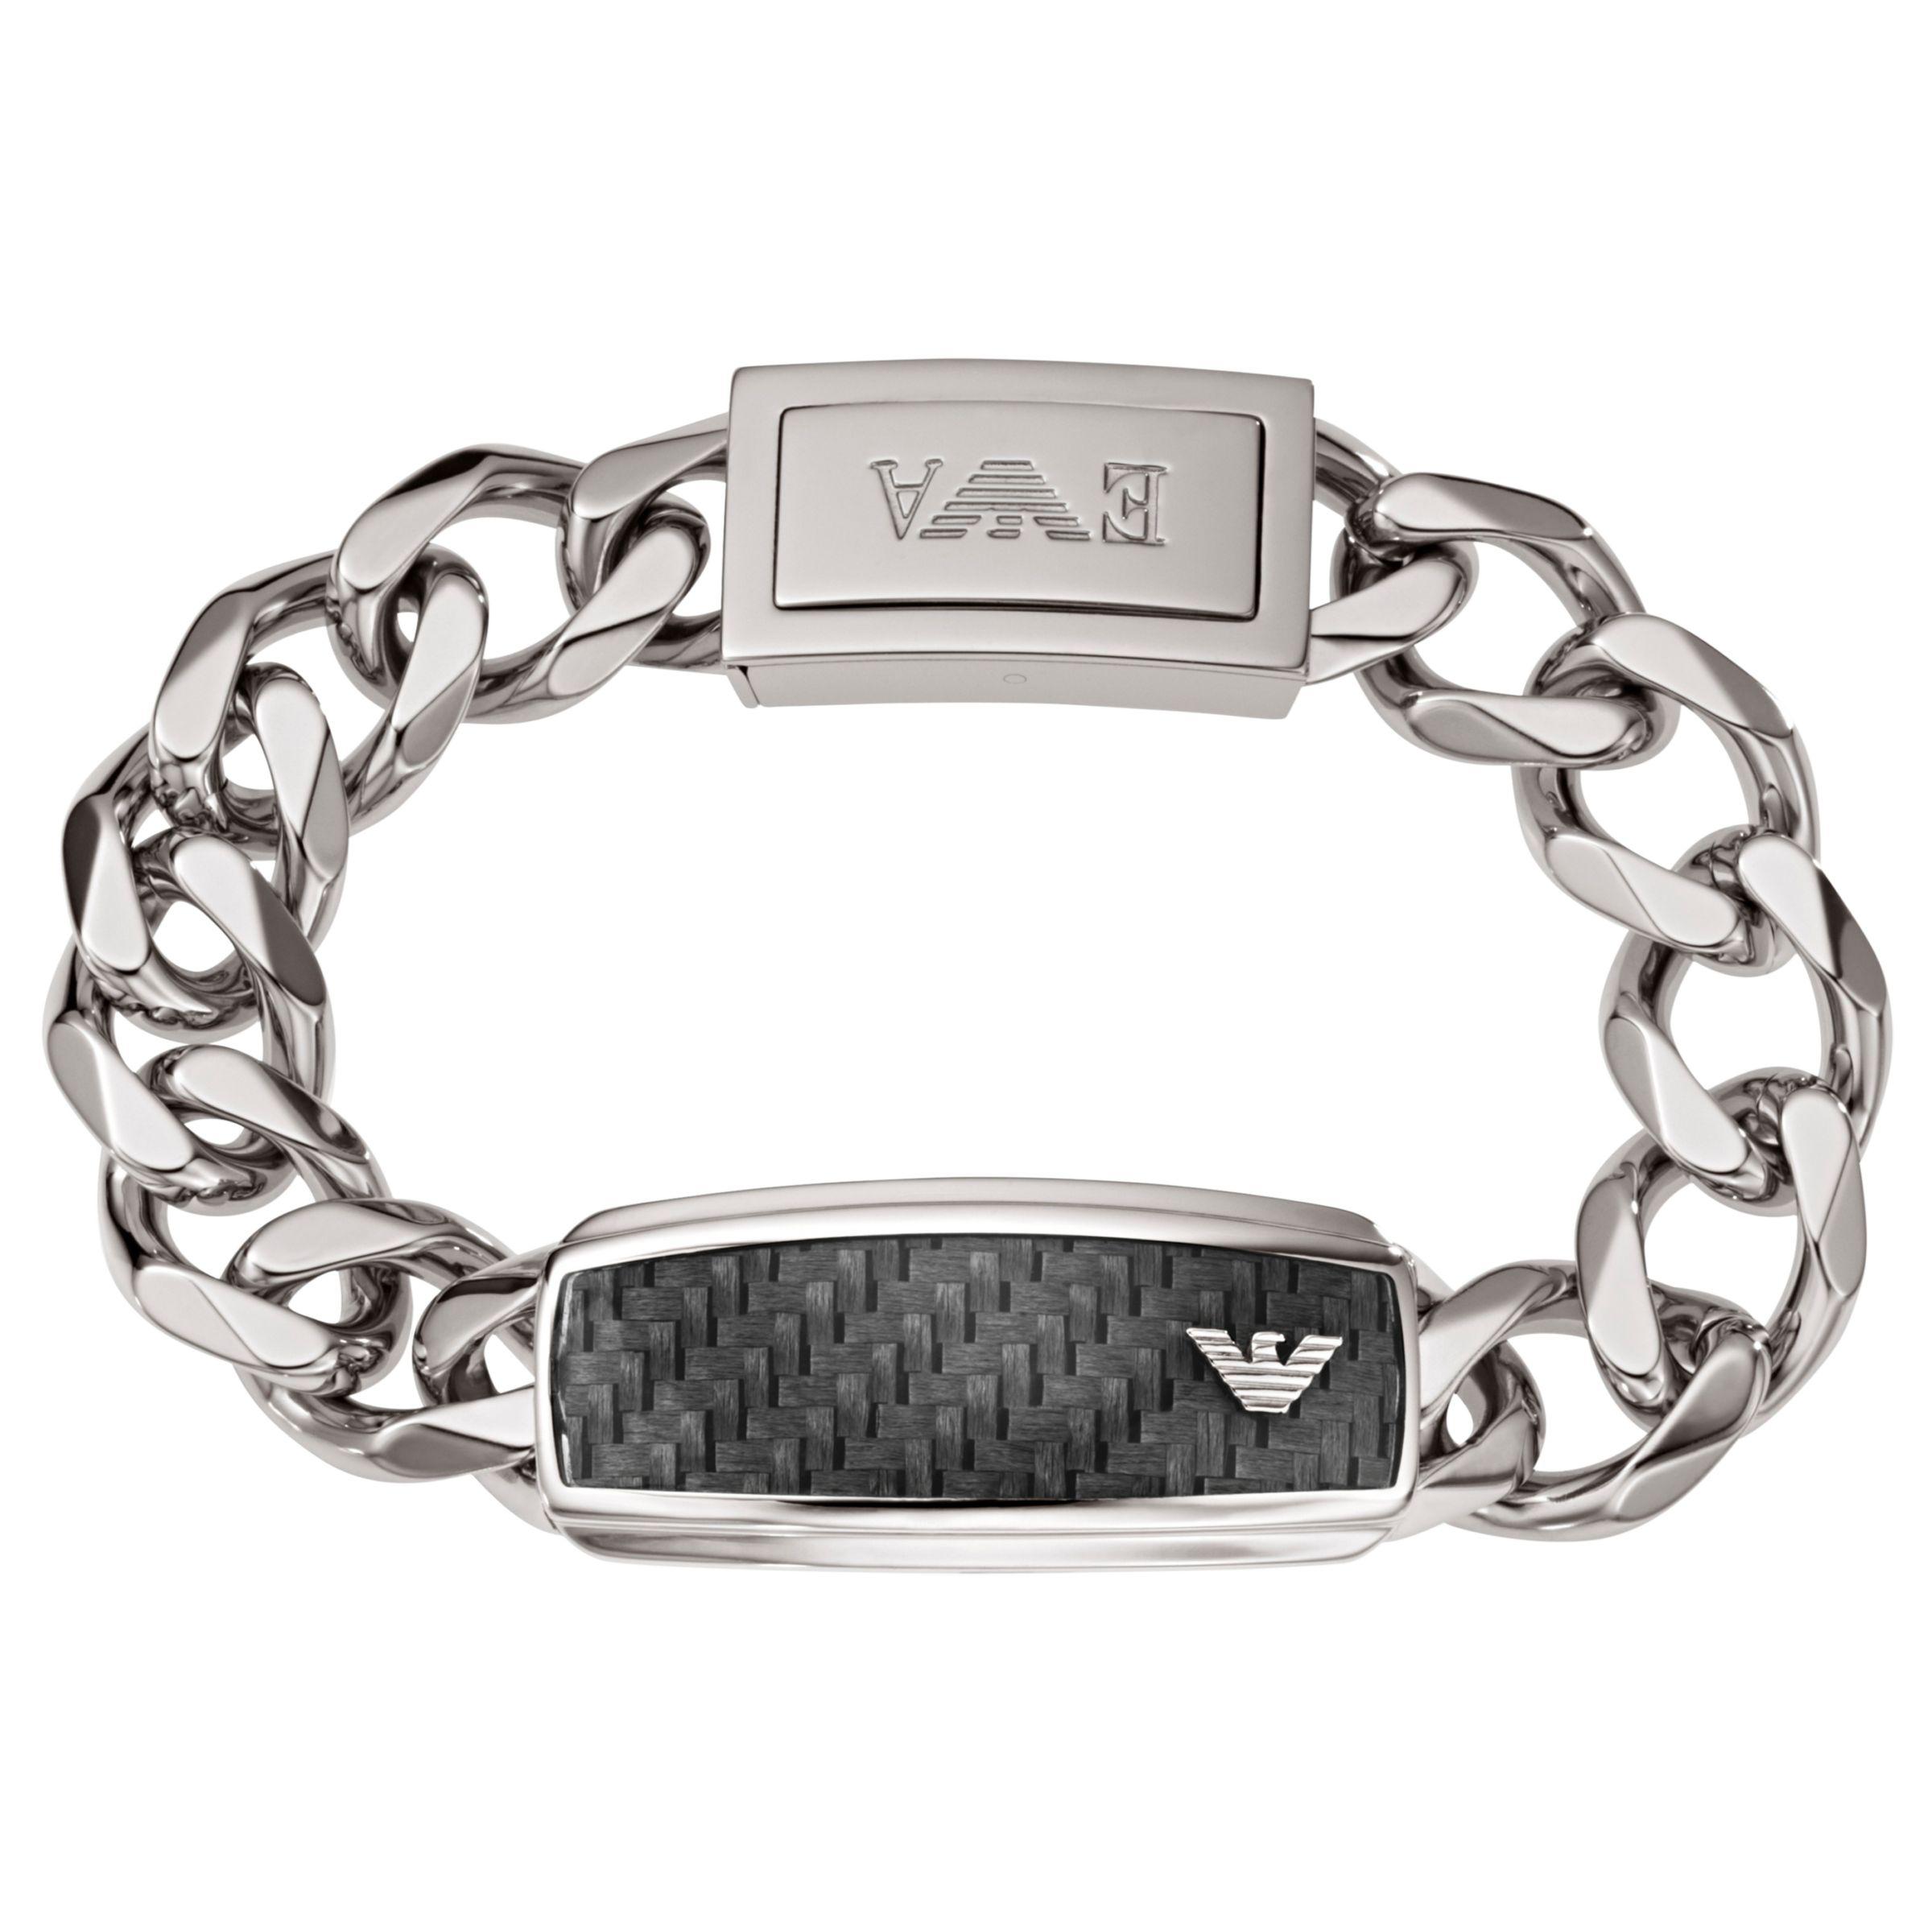 Buy Emporio Armani Men Silver Stainless Steel Bracelet Online  899192   The Collective